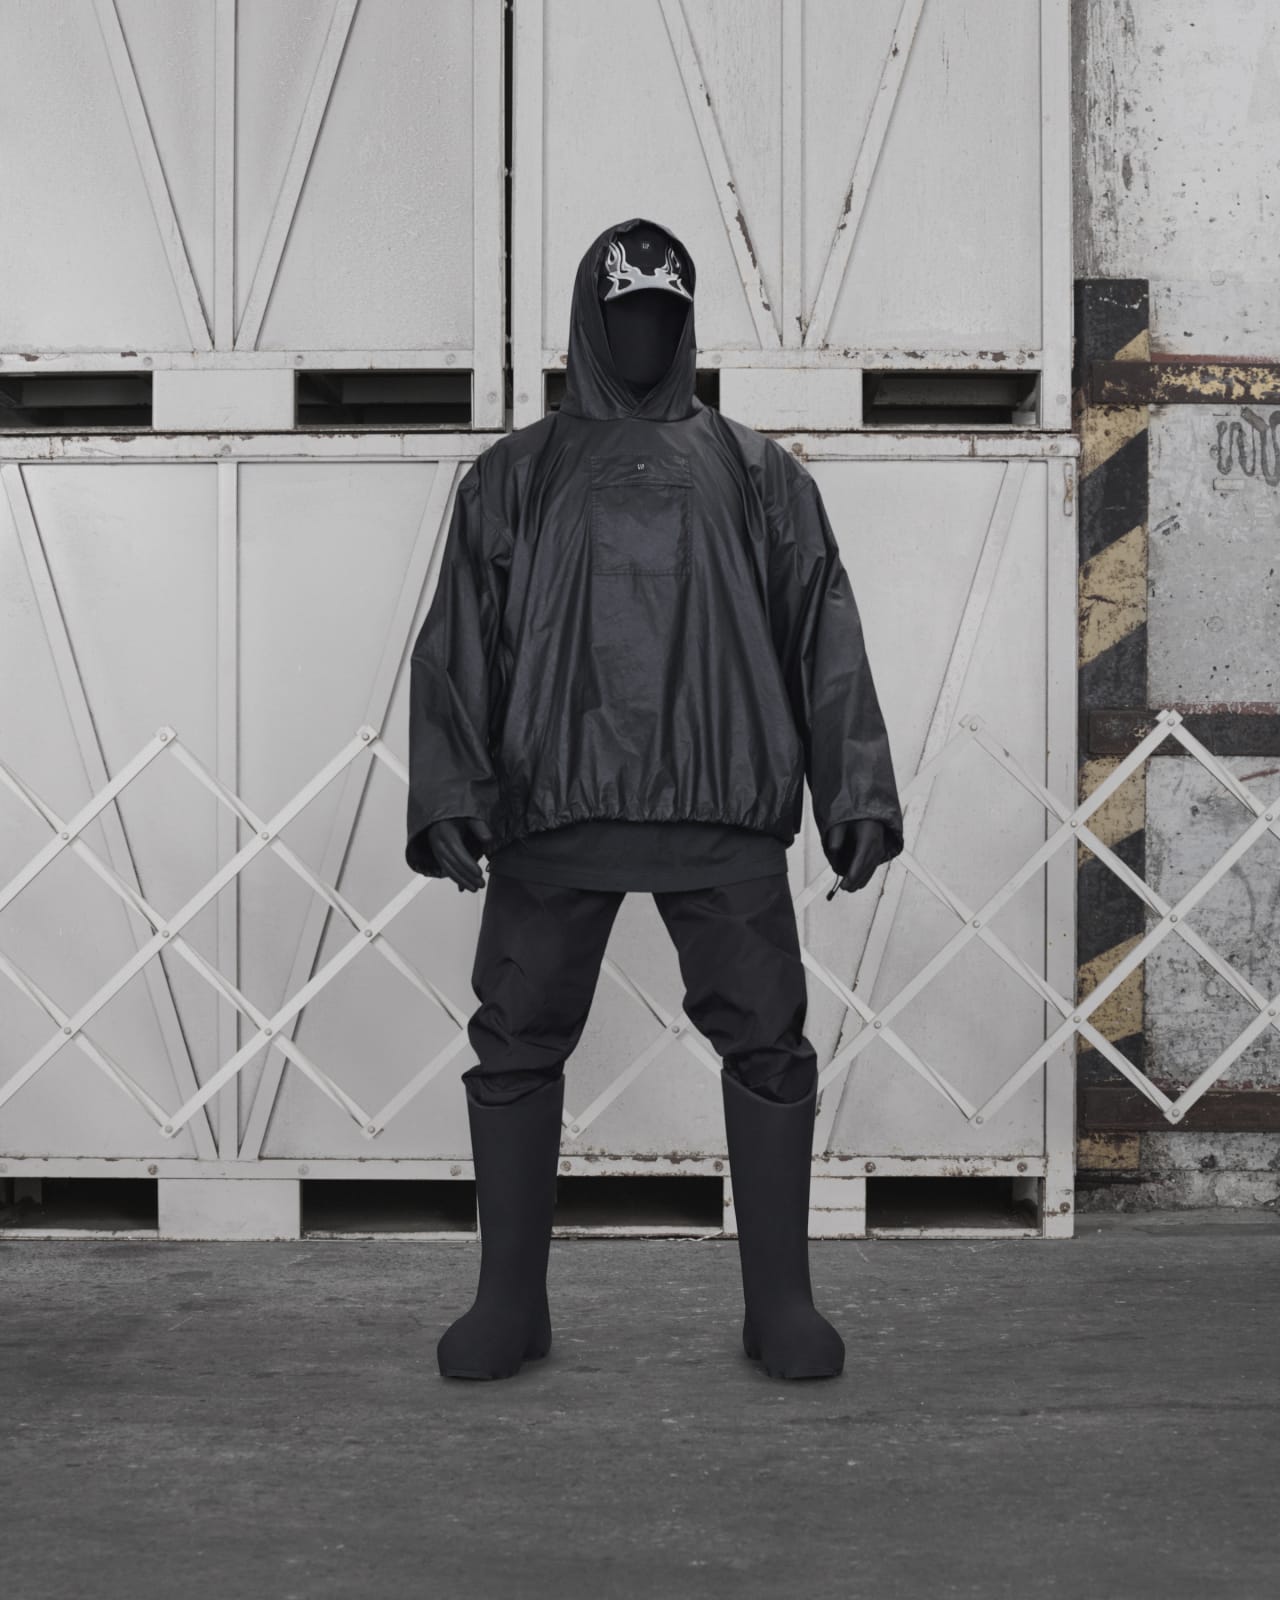 Yeezy Gap Engineered by Balenciaga Launches Part 2 | Complex